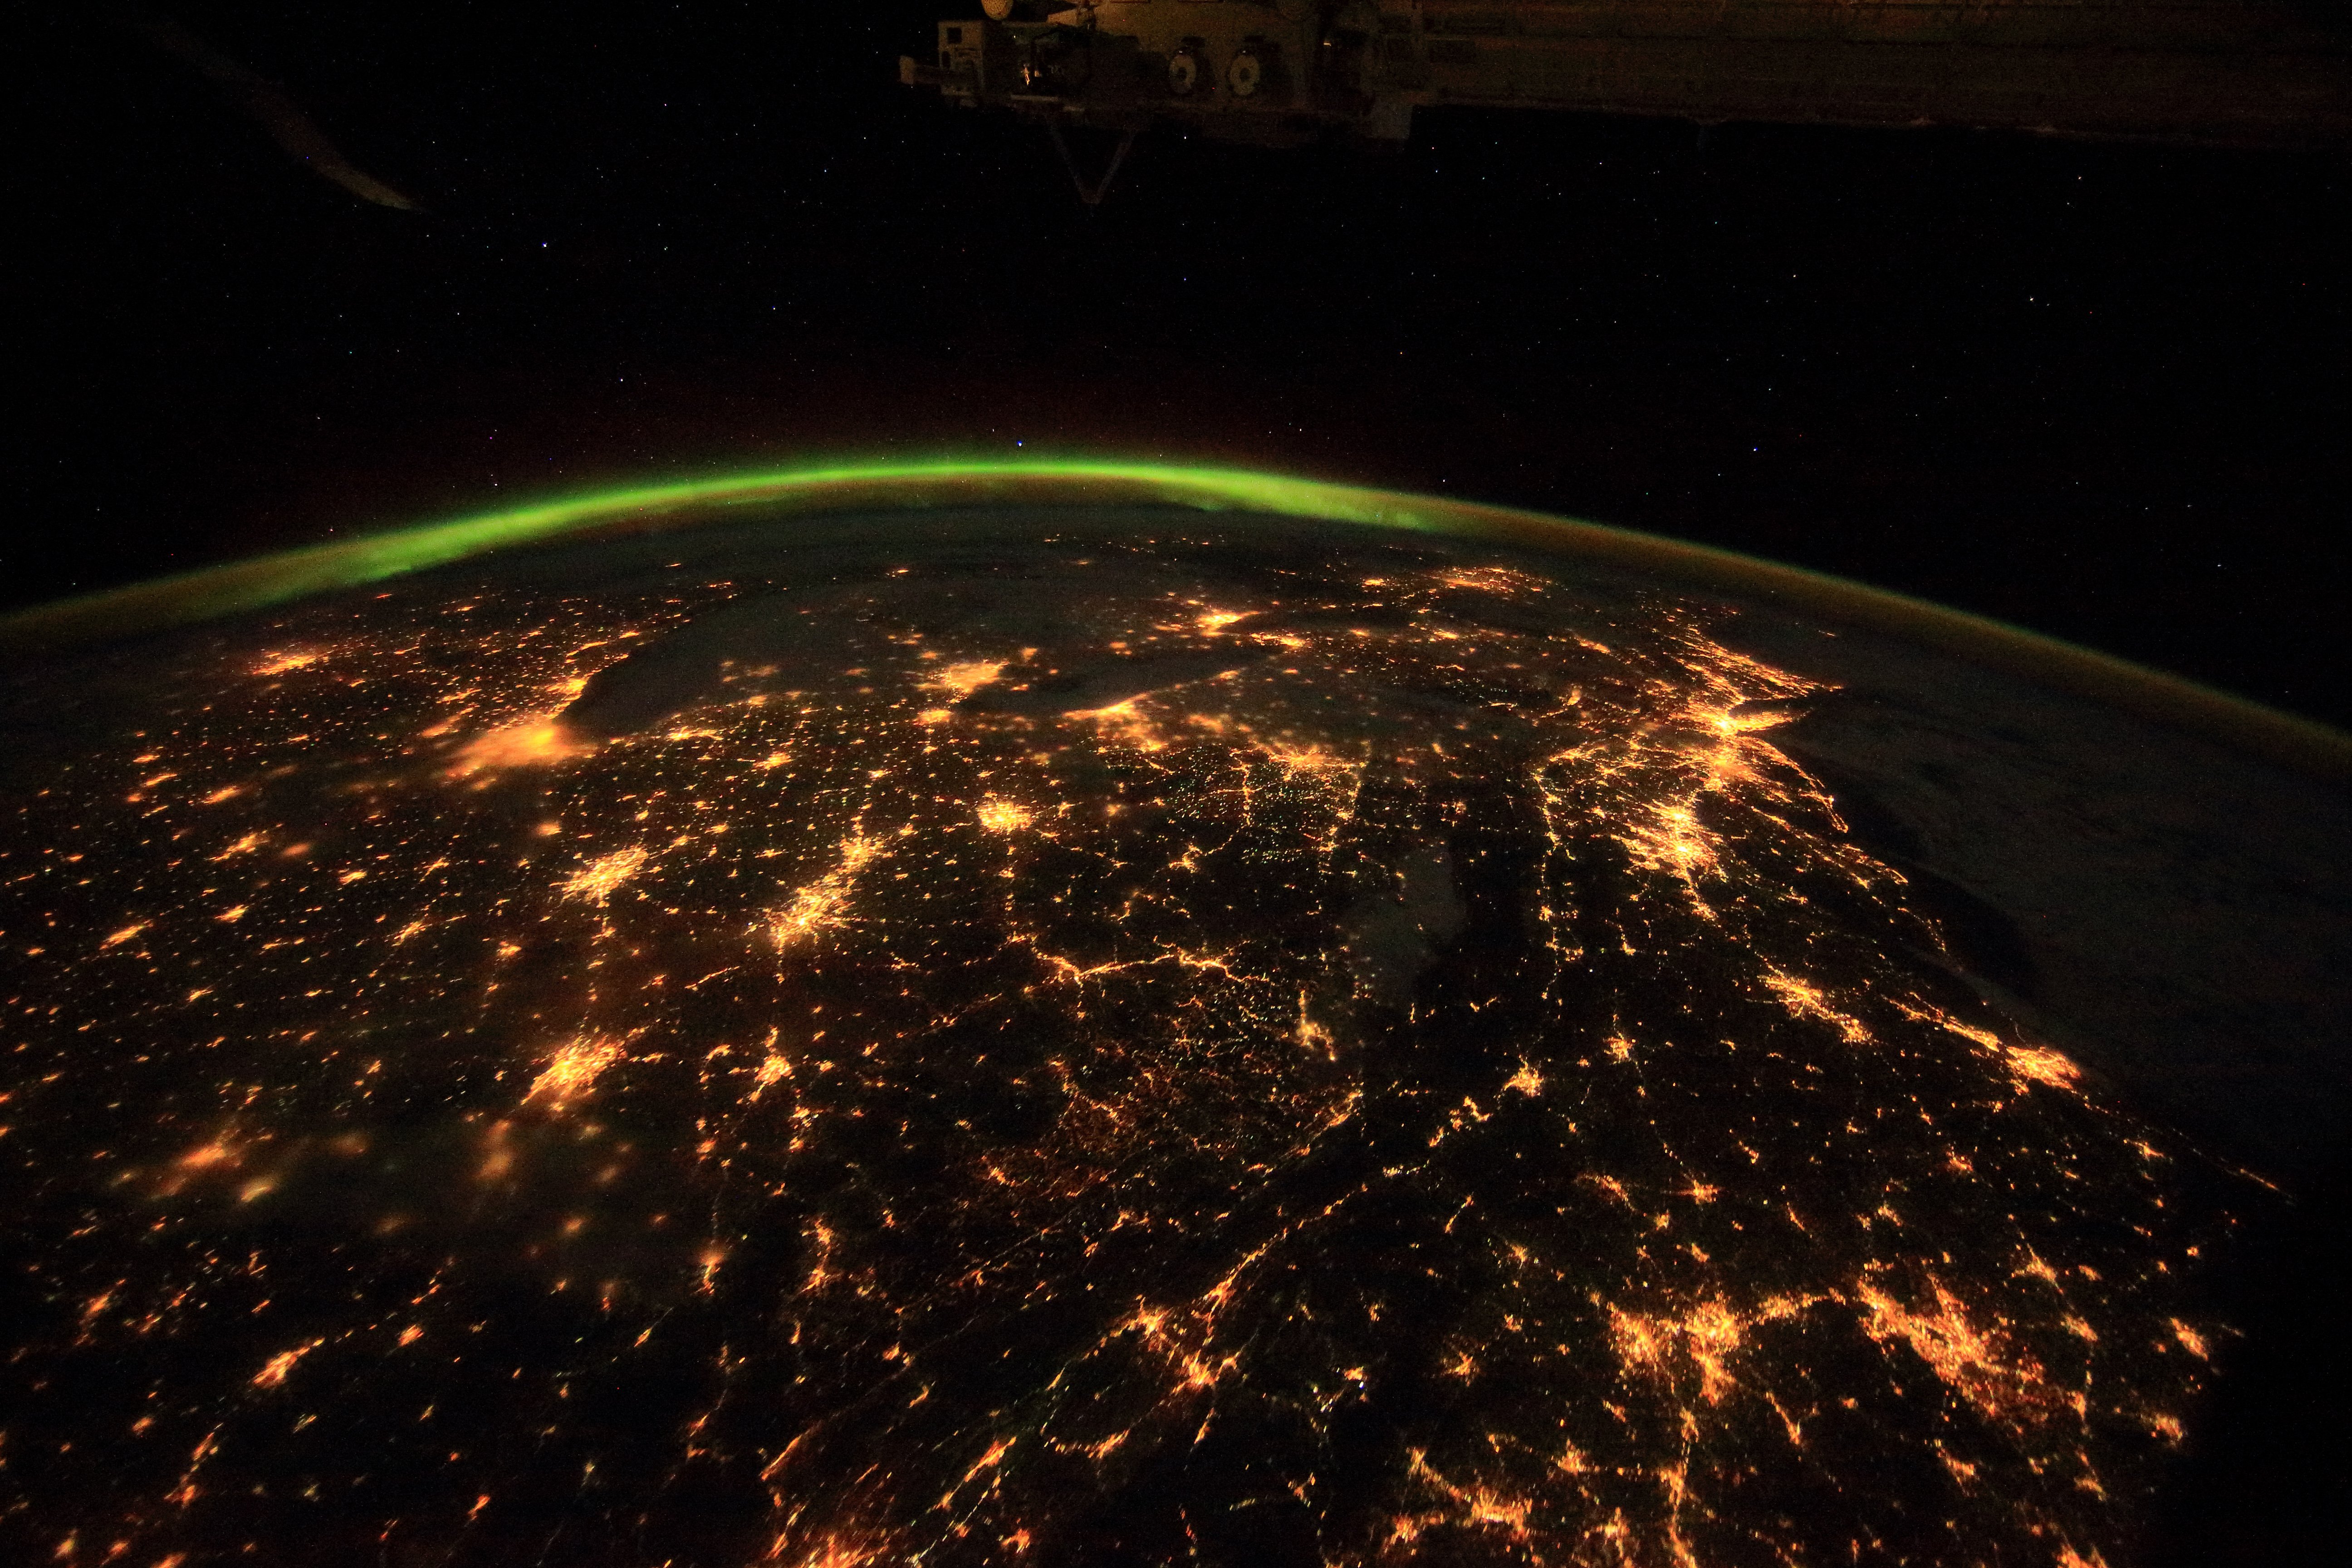 A nocturnal view of city lights from aboard the ISS, as seen in the IMAX film A Beautiful Planet.